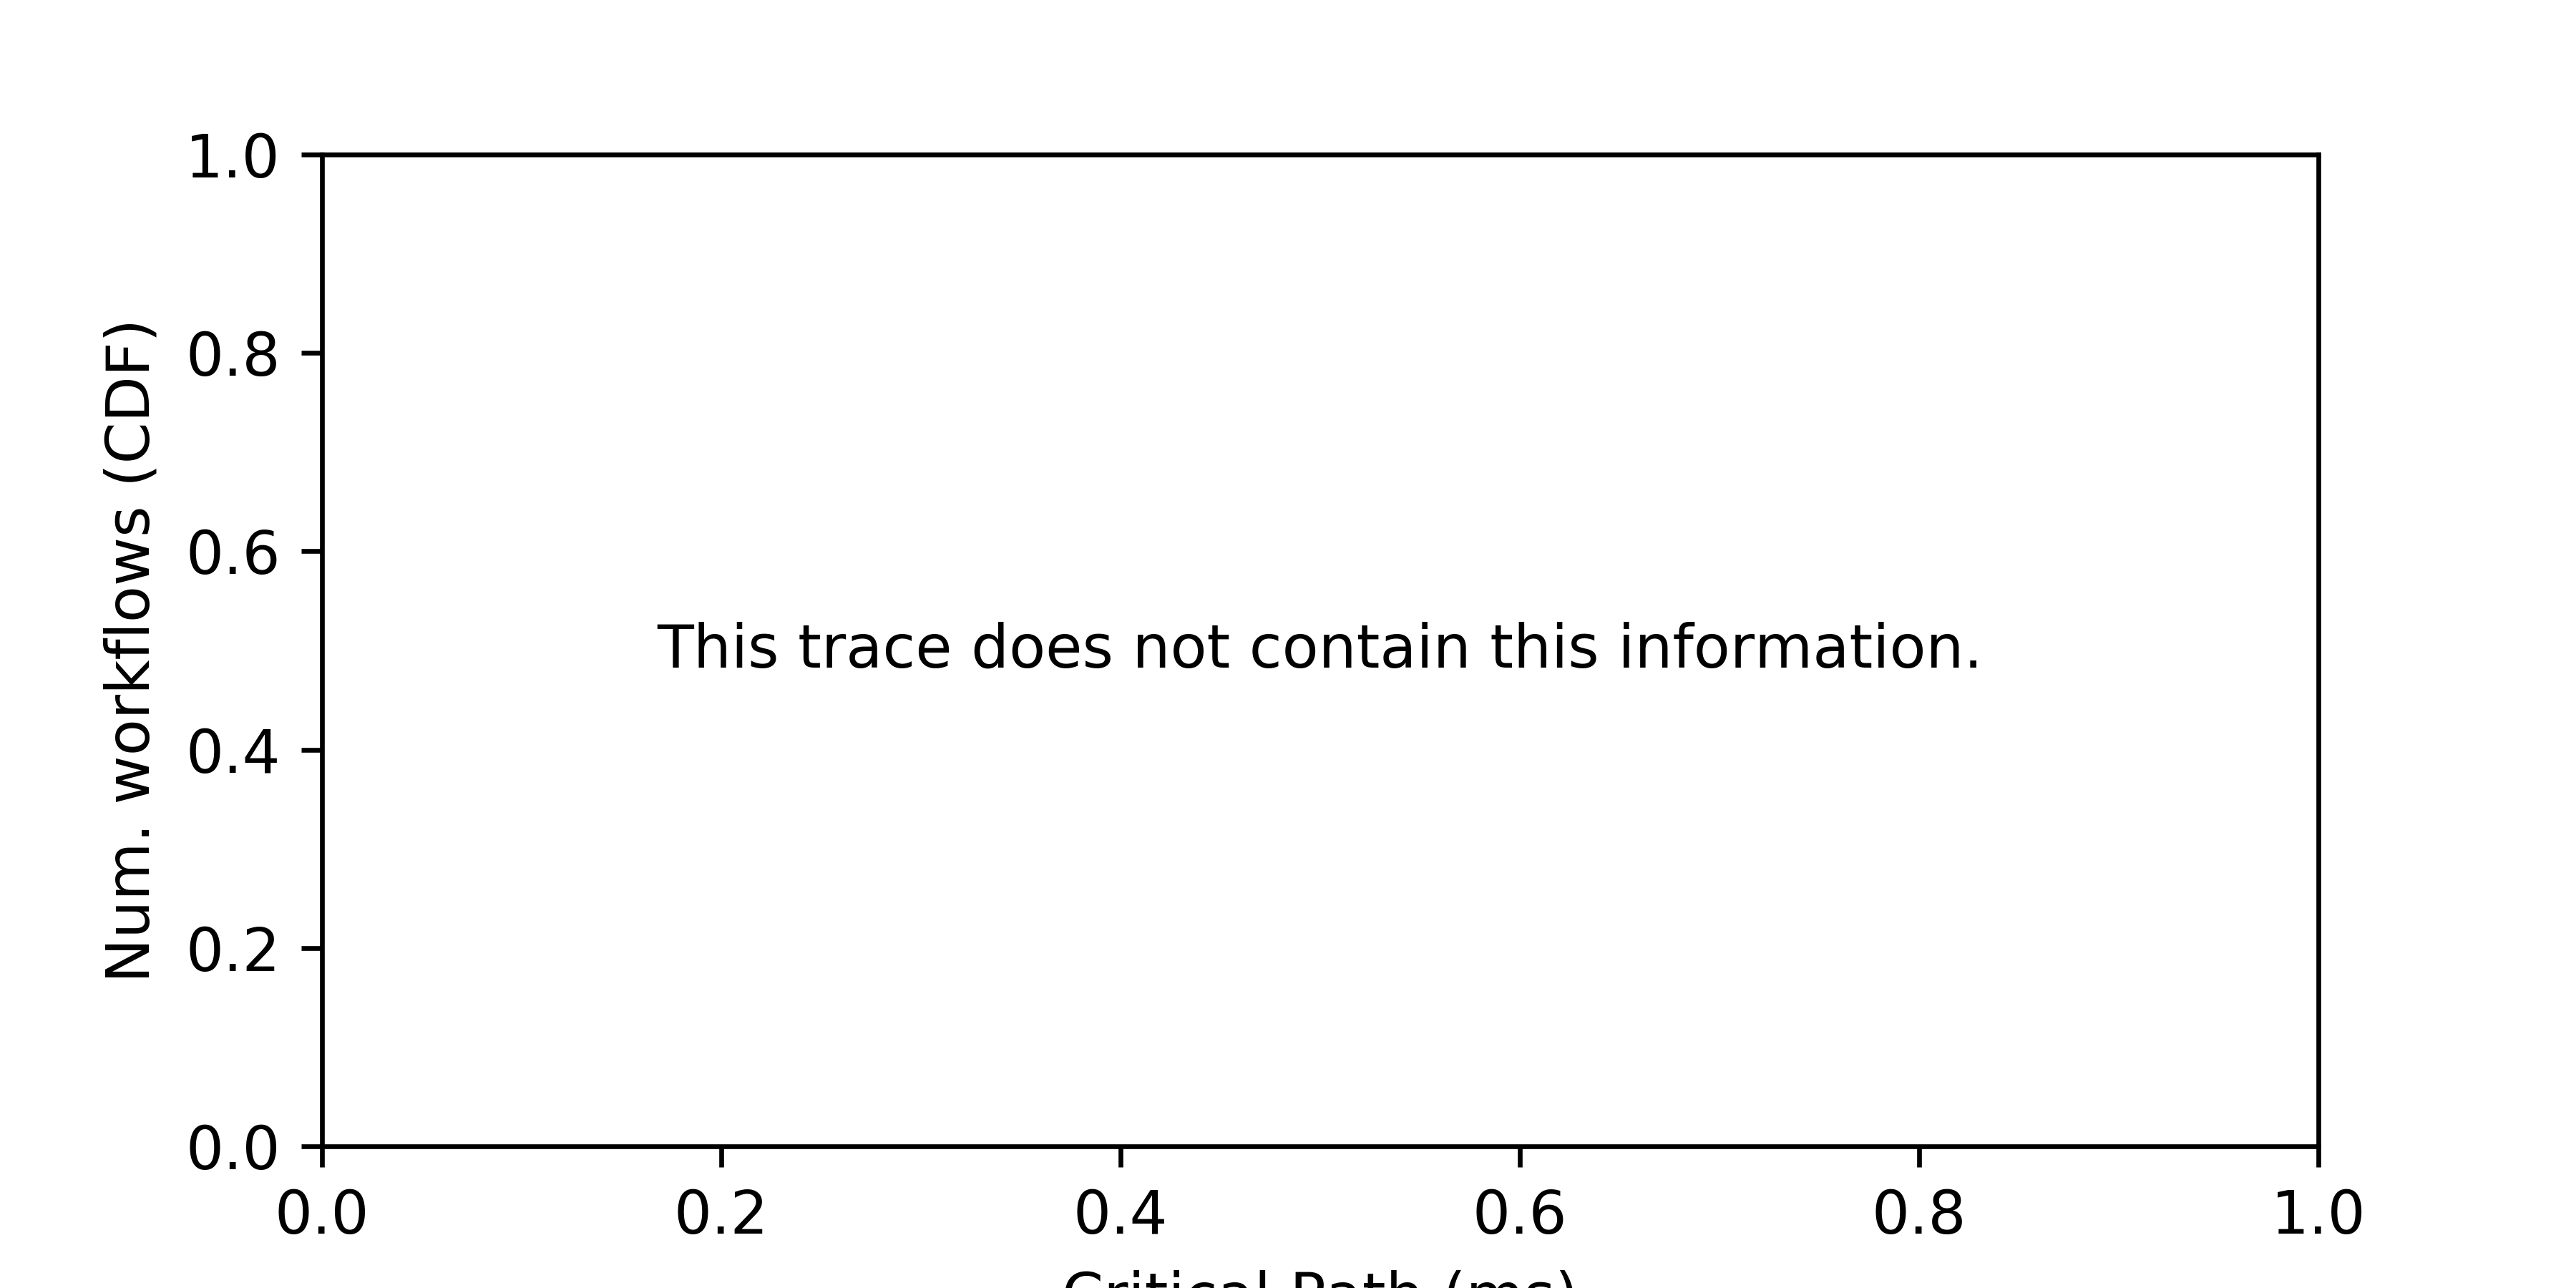 Job runtime CDF graph for the Two_Sigma_dft trace.